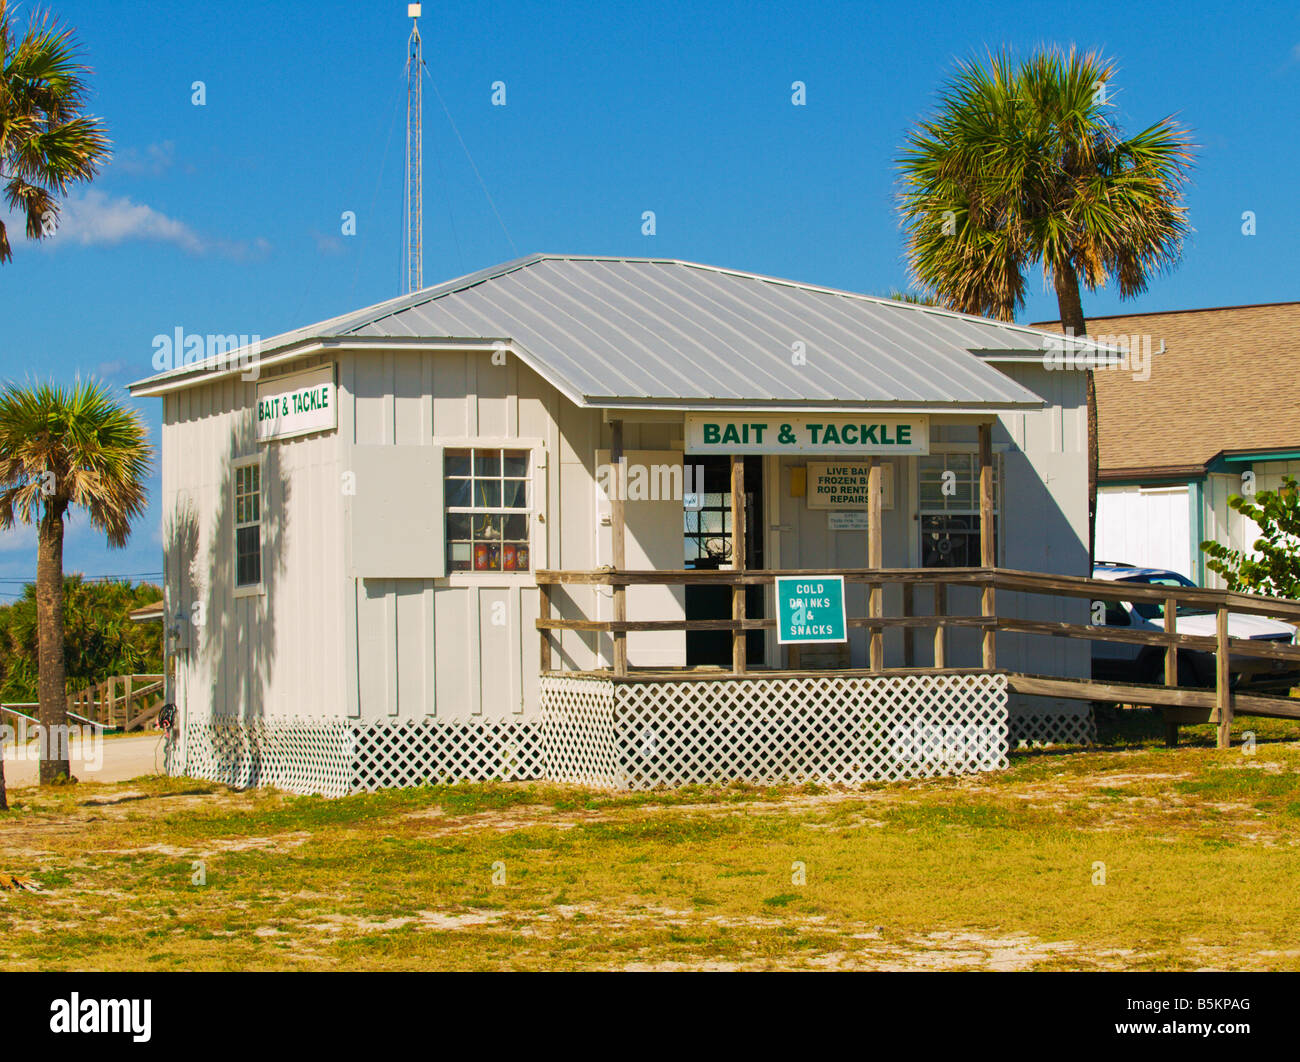 Fishing tackle and bait shop Stock Photo - Alamy